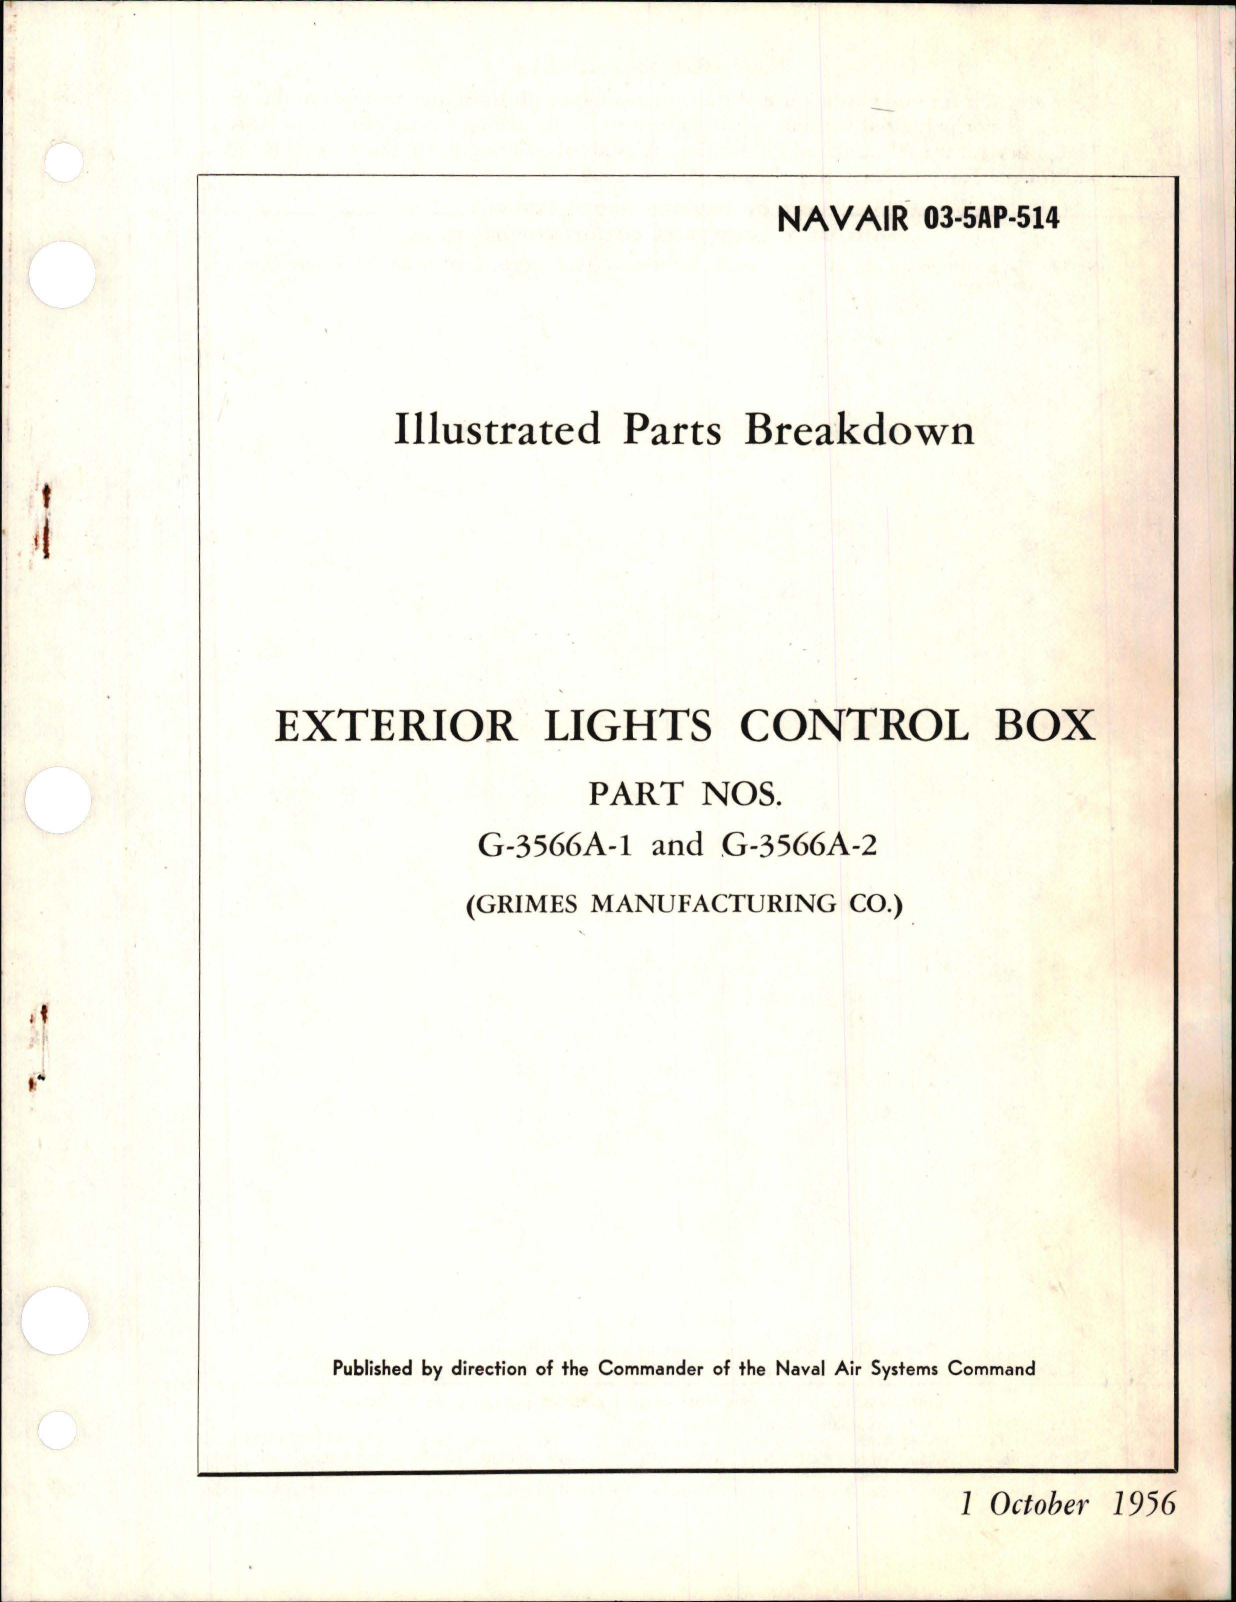 Sample page 1 from AirCorps Library document: Illustrated Parts Breakdown for Exterior Lights Control Box - Parts G-3566A-1 and G-3566A-2 